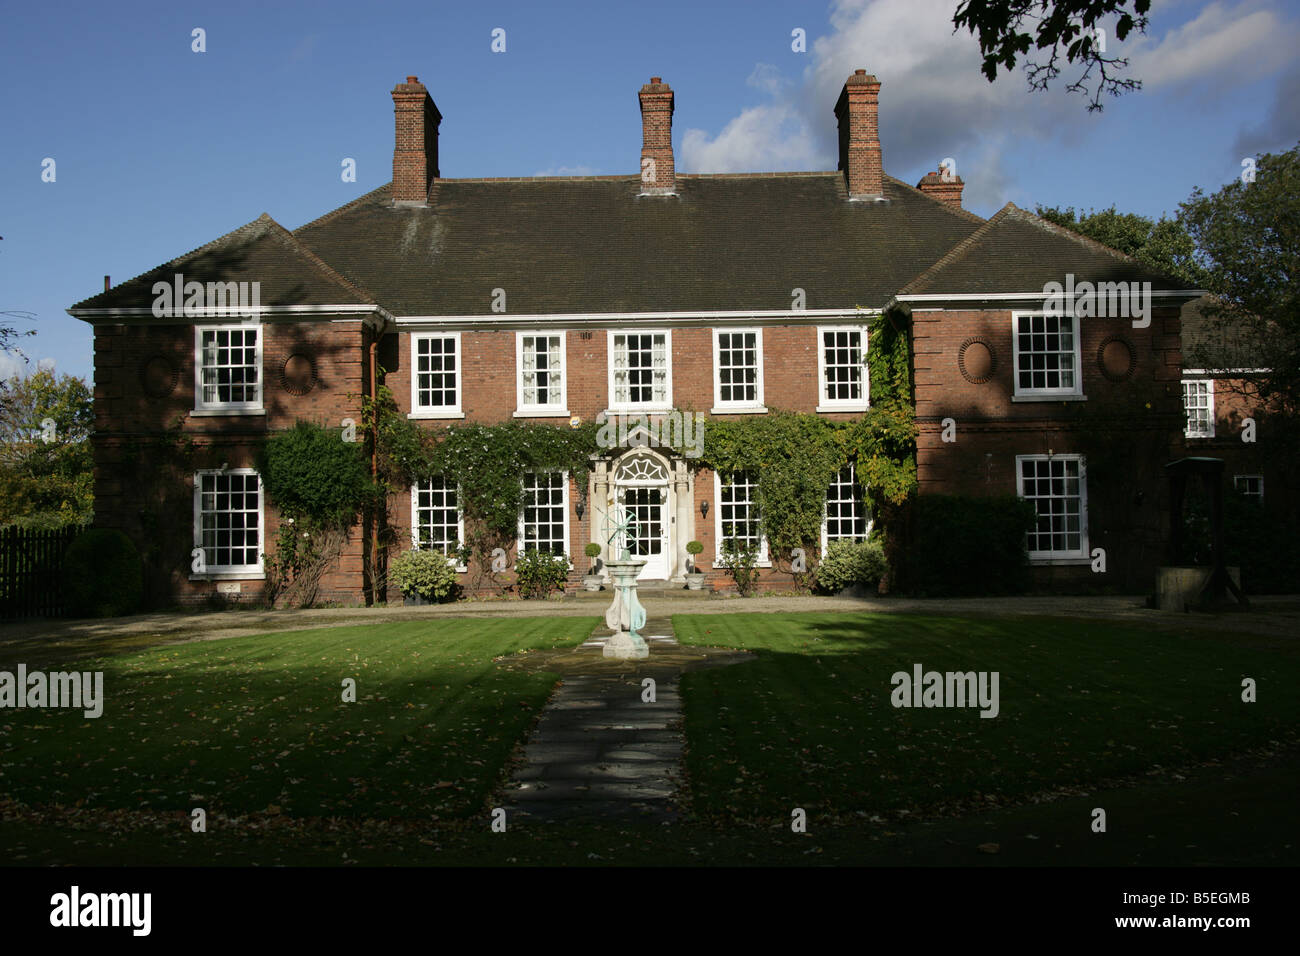 City of York, England. The front entrance and garden to the Deanery within York Minster’s Dean’s Park. Stock Photo